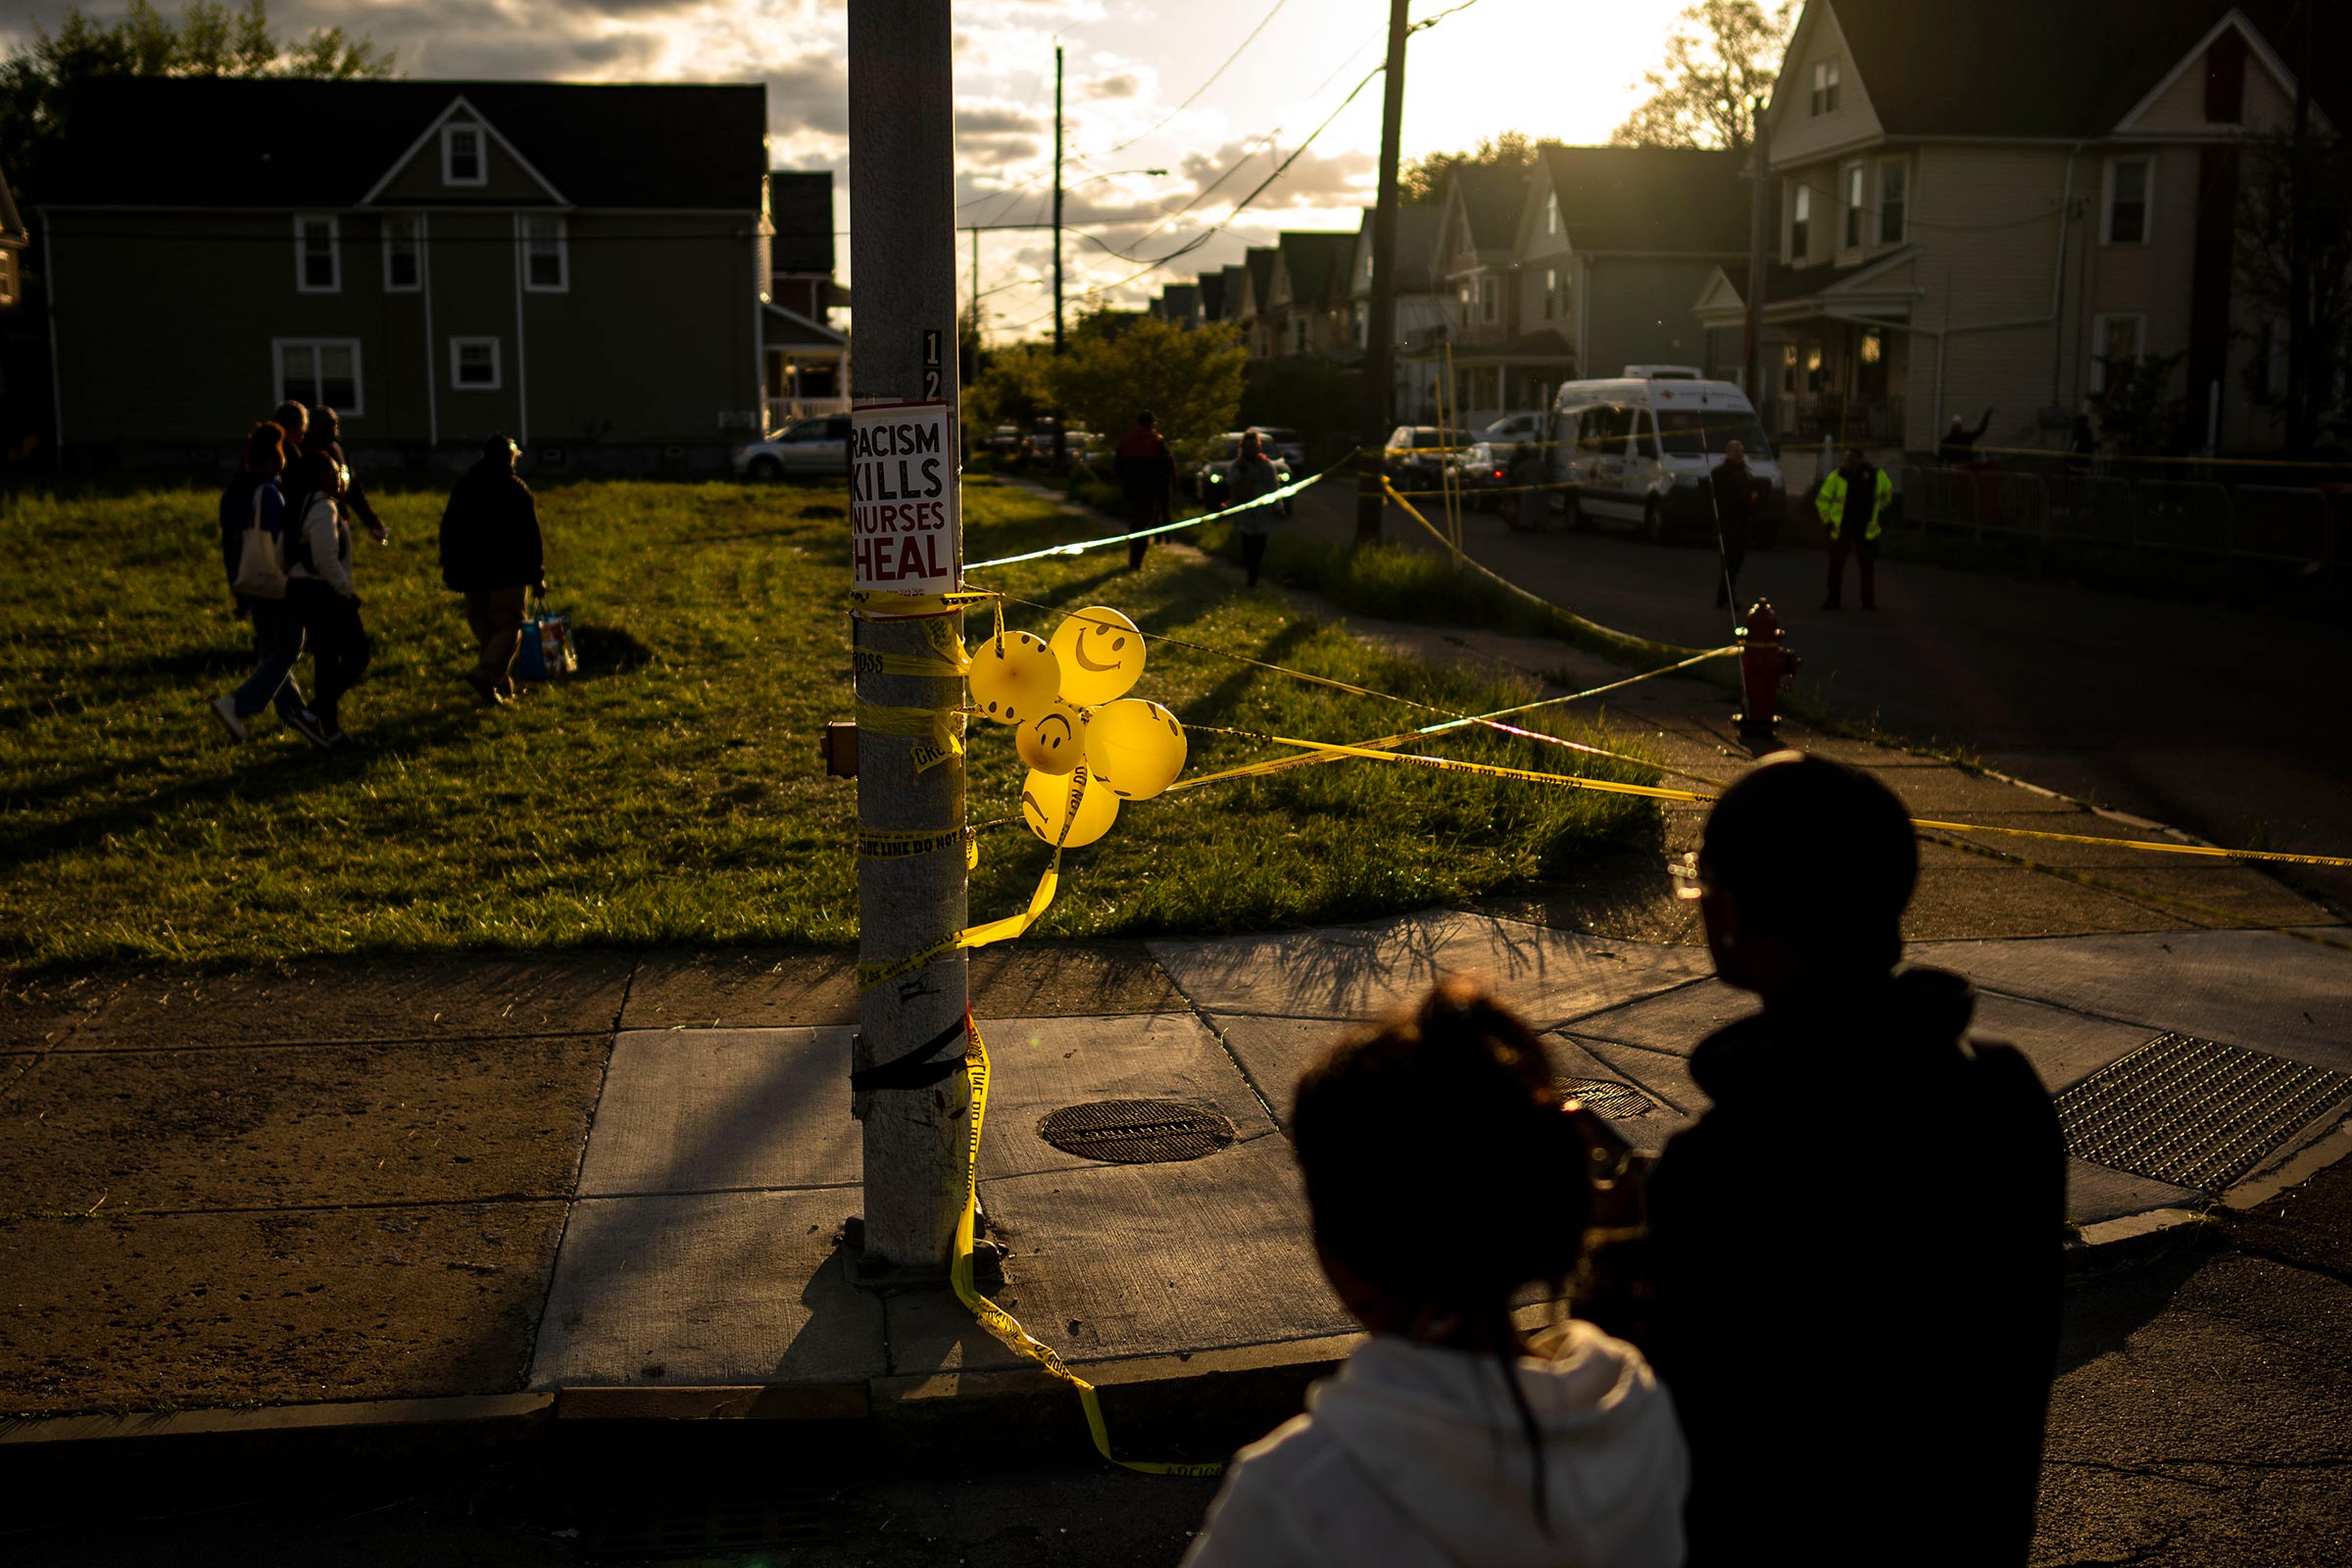 People walking near the intersection of Jefferson Avenue and Riley Street attend a vigil across the street from Tops Friendly Market in Buffalo, NY on May 17, 2022. The Supermarket was the site of a fatal shooting of 10 people at a grocery store in a historically Black neighborhood of Buffalo by a young white gunman is being investigated as a hate crime and an act of racially motivated violent extremism, according to federal officials. (Kent Nishimura—Los Angeles Times/Getty Images)